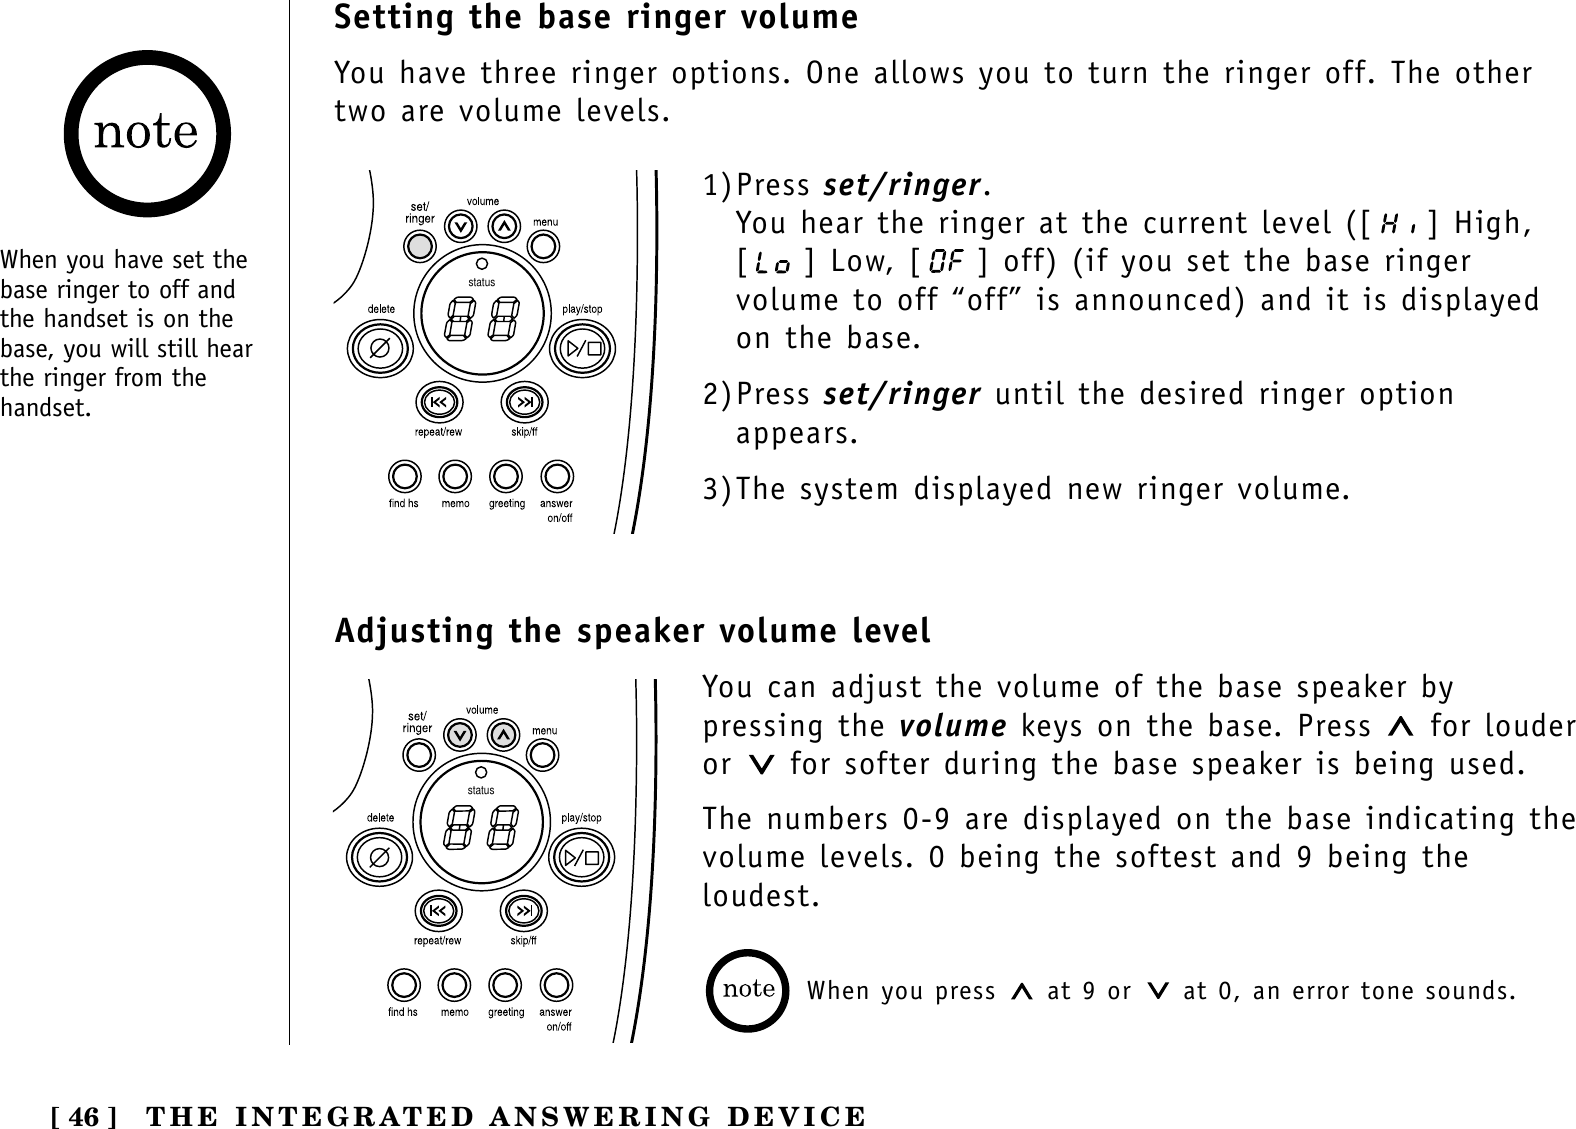 [ 46 ] THE INTEGRATED ANSWERING DEVICESetting the base ringer volumeYou have three ringer options. One allows you to turn the ringer off. The othertwo are volume levels.status1)Press set/ringer.You hear the ringer at the current level ([ ] High,[ ] Low, [ ] off) (if you set the base ringervolume to off “off” is announced) and it is displayedon the base.2)Press set/ringer until the desired ringer optionappears.3)The system displayed new ringer volume.When you have set thebase ringer to off andthe handset is on thebase, you will still hearthe ringer from thehandset.Adjusting the speaker volume levelYou can adjust the volume of the base speaker bypressing the volume keys on the base. Press  for louderor  for softer during the base speaker is being used.The numbers 0-9 are displayed on the base indicating thevolume levels. 0 being the softest and 9 being theloudest.When you press  at 9 or  at 0, an error tone sounds.status